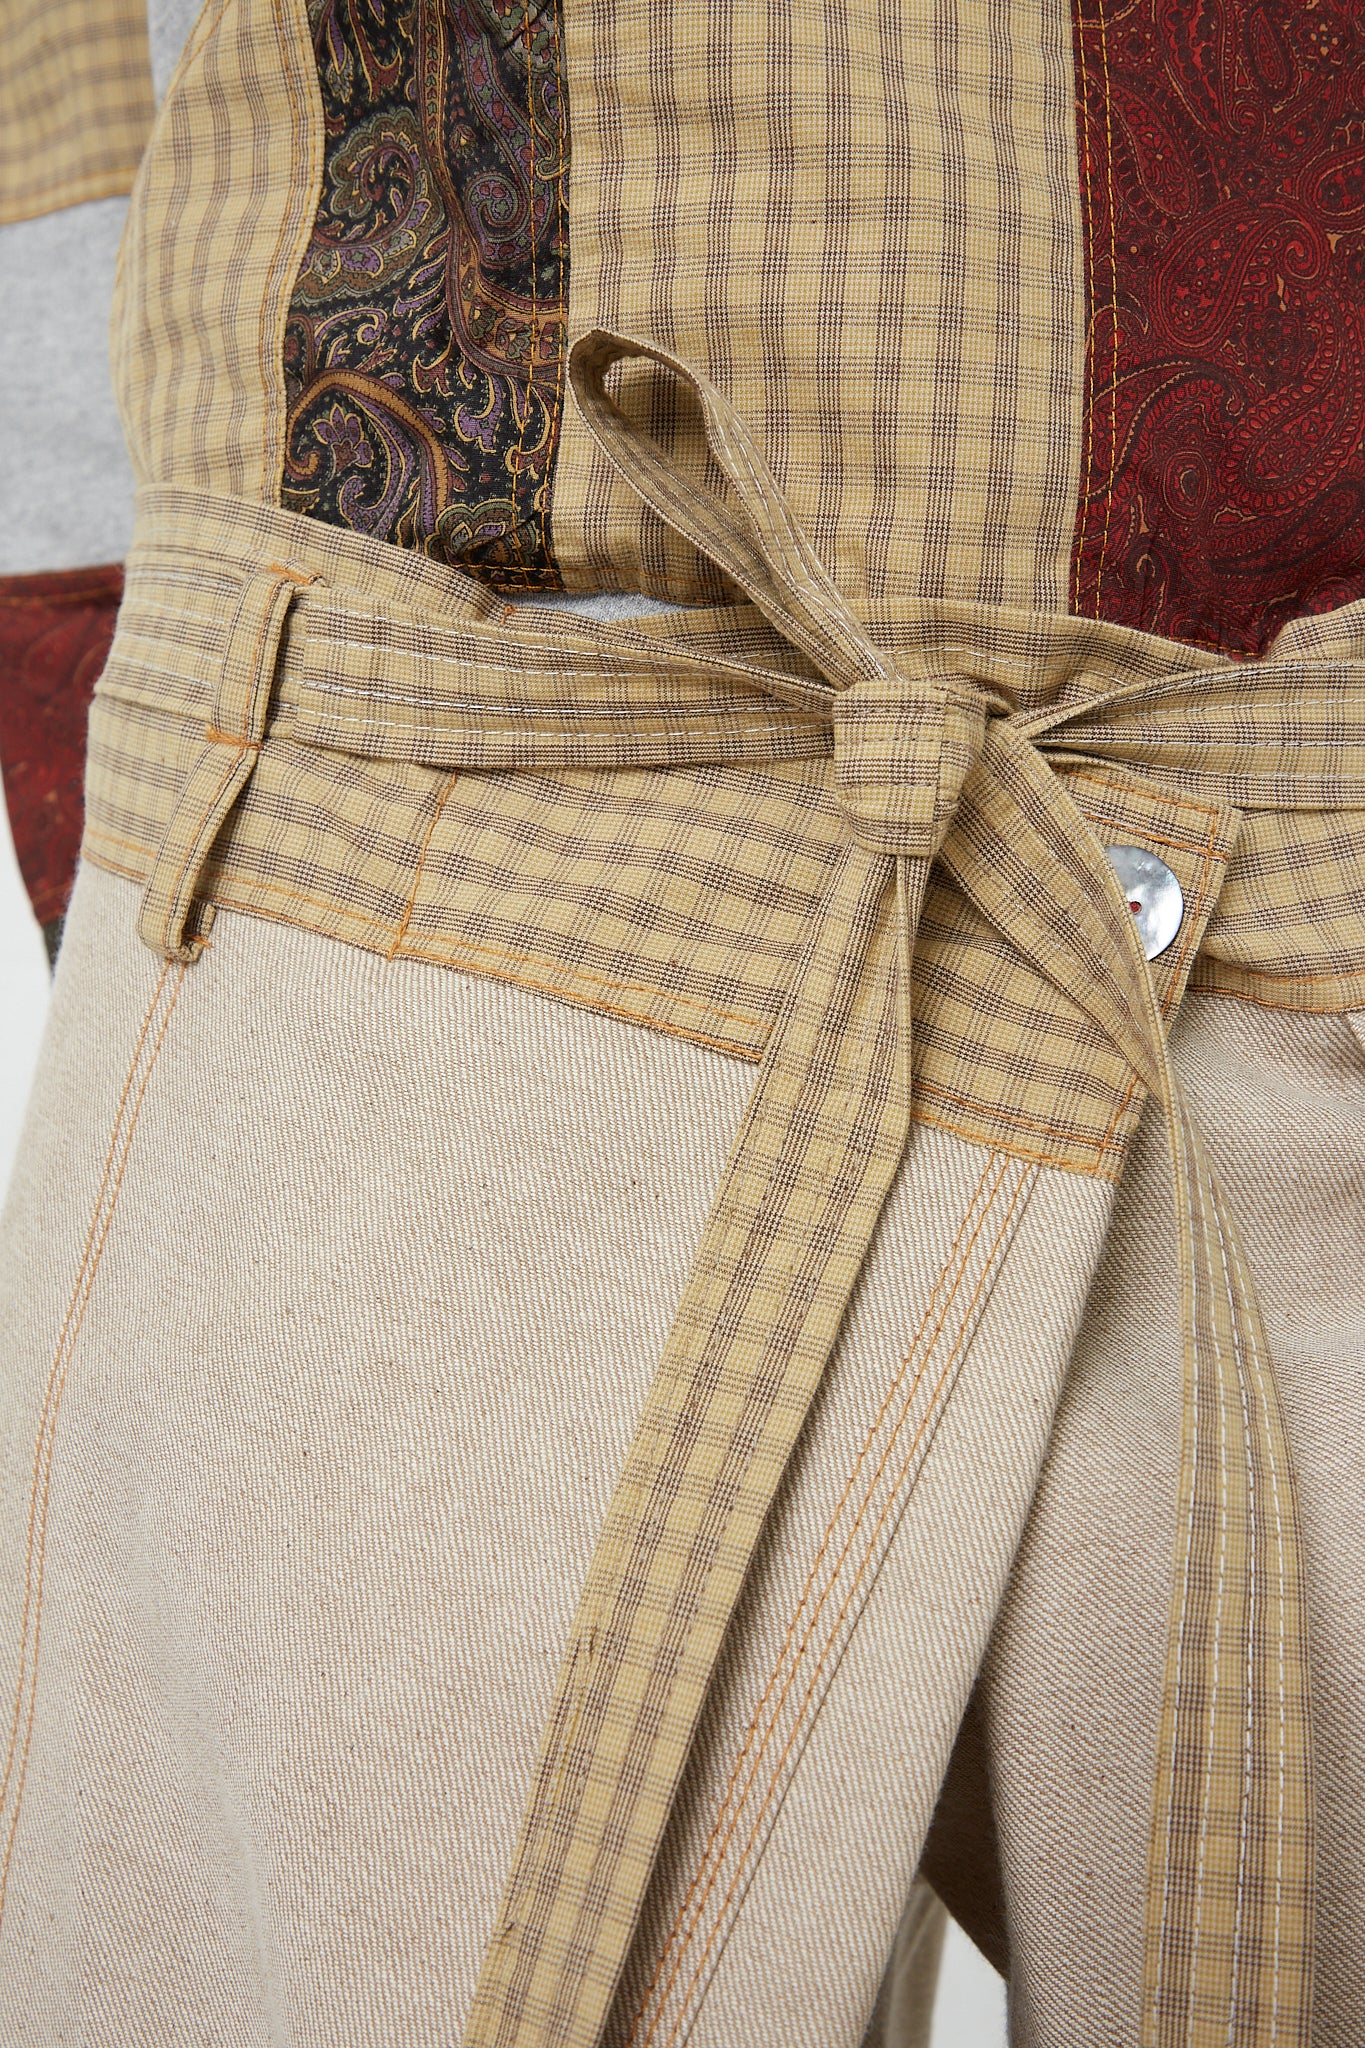 A close up of an oversized SC103 belt with a Check Cotton Jupiter Pant in Tent pattern made of cotton.